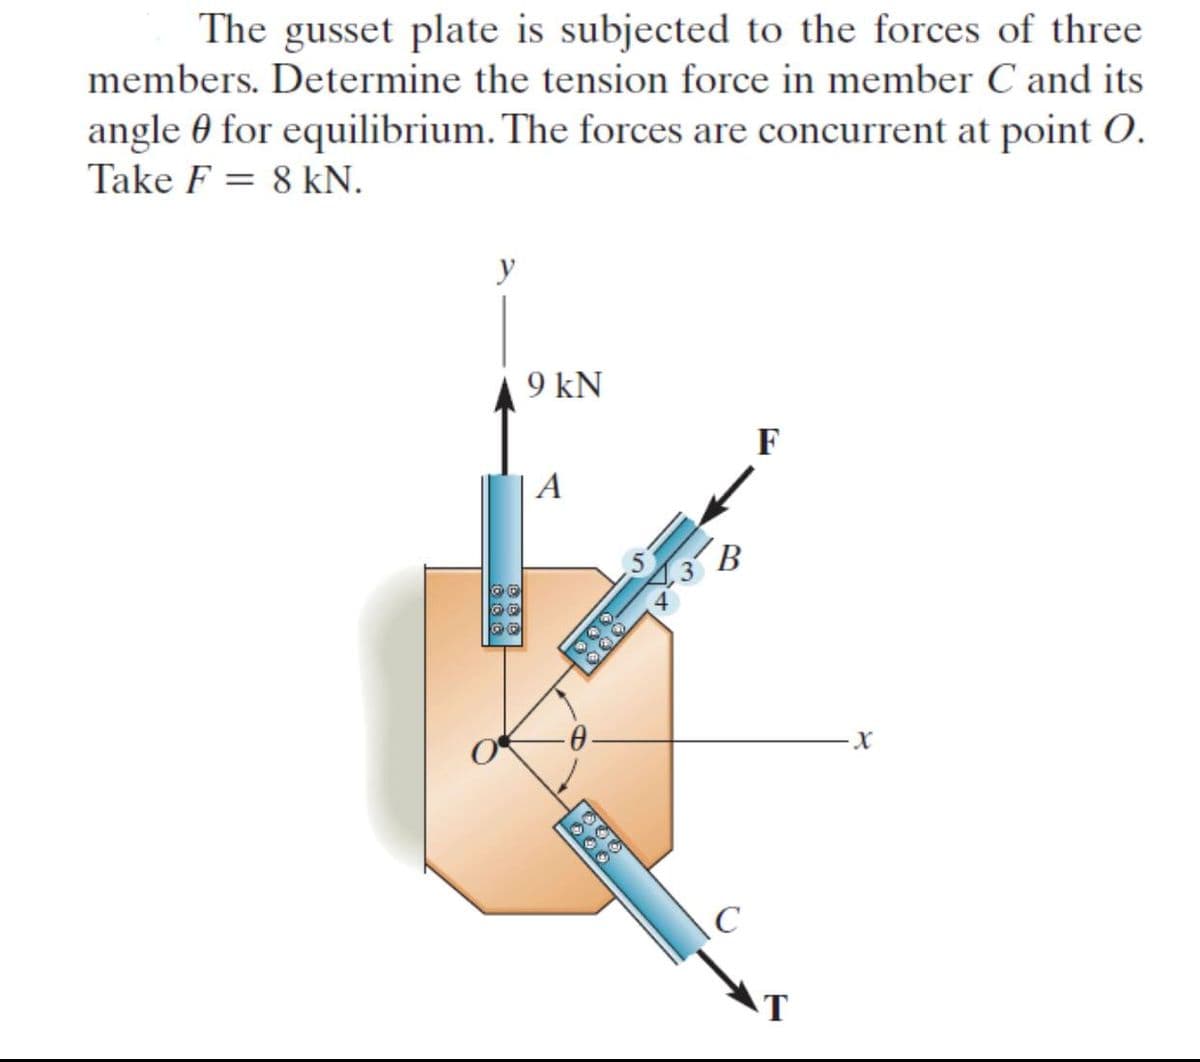 The gusset plate is subjected to the forces of three
members. Determine the tension force in member C and its
angle 0 for equilibrium. The forces are concurrent at point O.
Take F = 8 kN.
y
9 kN
F
| A
B
AT
